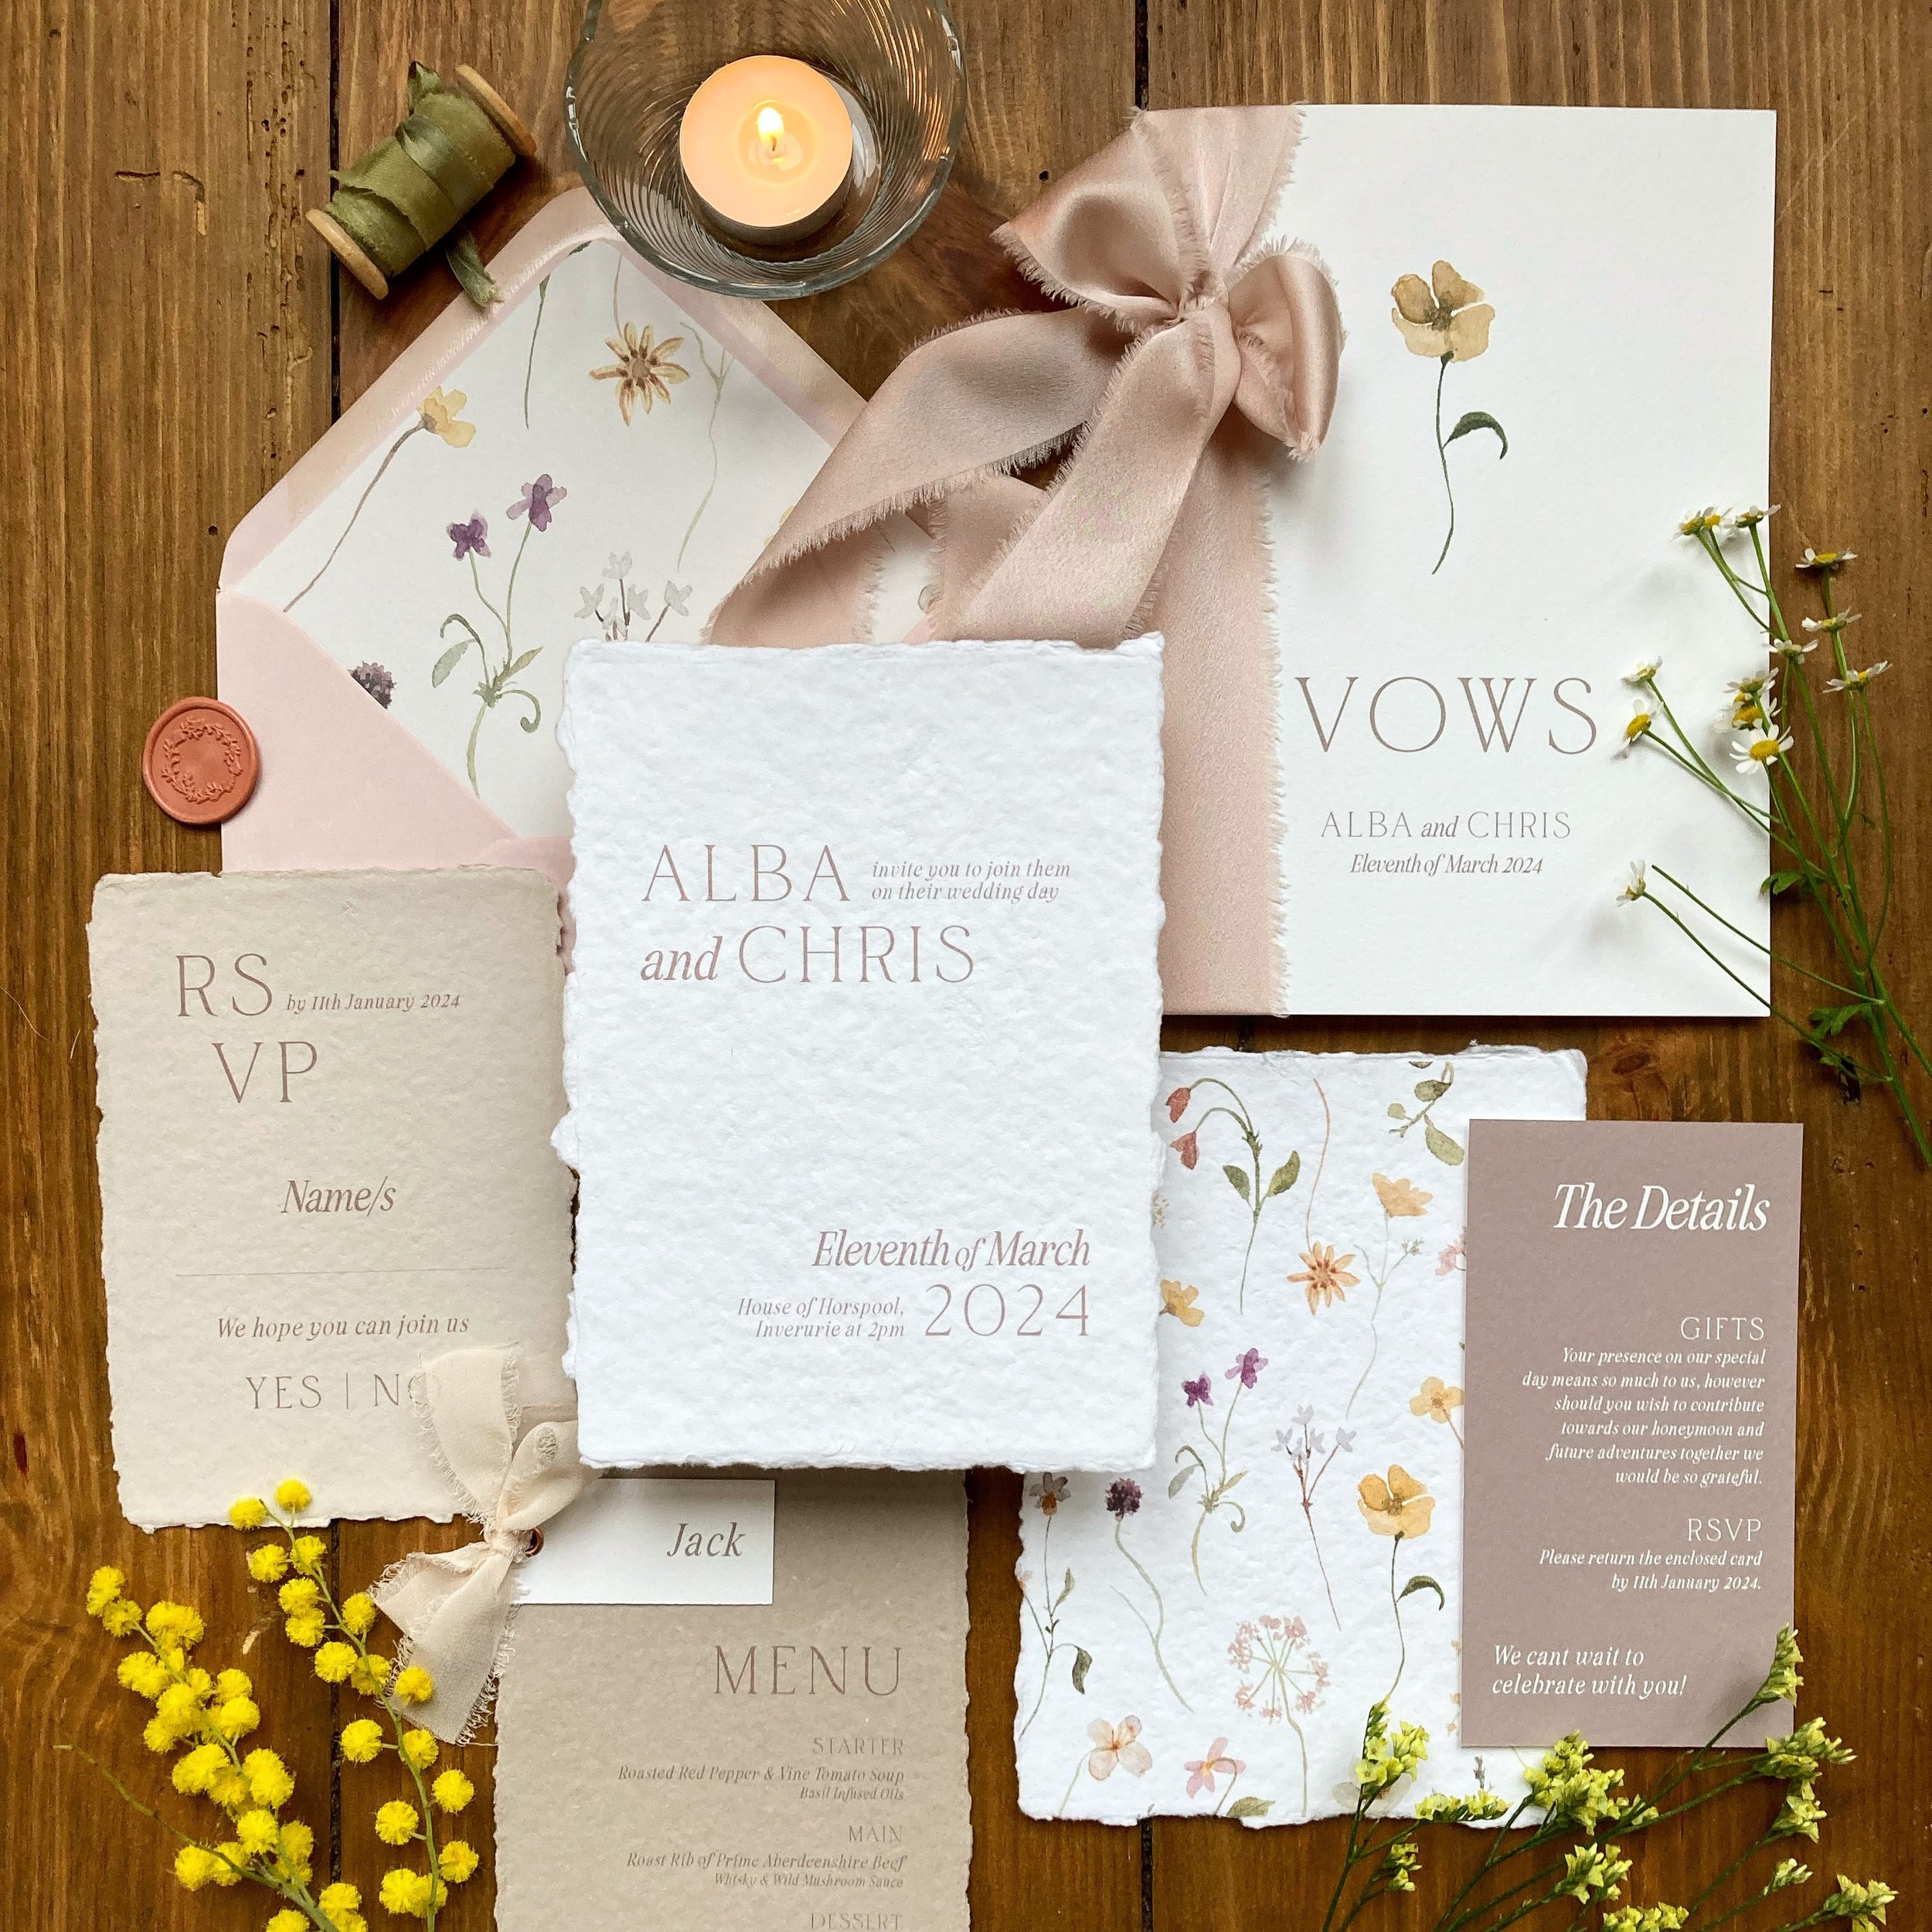 Handmade and textured papers with floral touches and the loveliest silk and chiffon ribbons 🎀🥰
⠀⠀⠀⠀
#weddingstationery #weddinginvitations #invitations #prettypaper #lovepaperco #pursuepretty #modernweddingstationery #scottishwedding #aberdeenshire